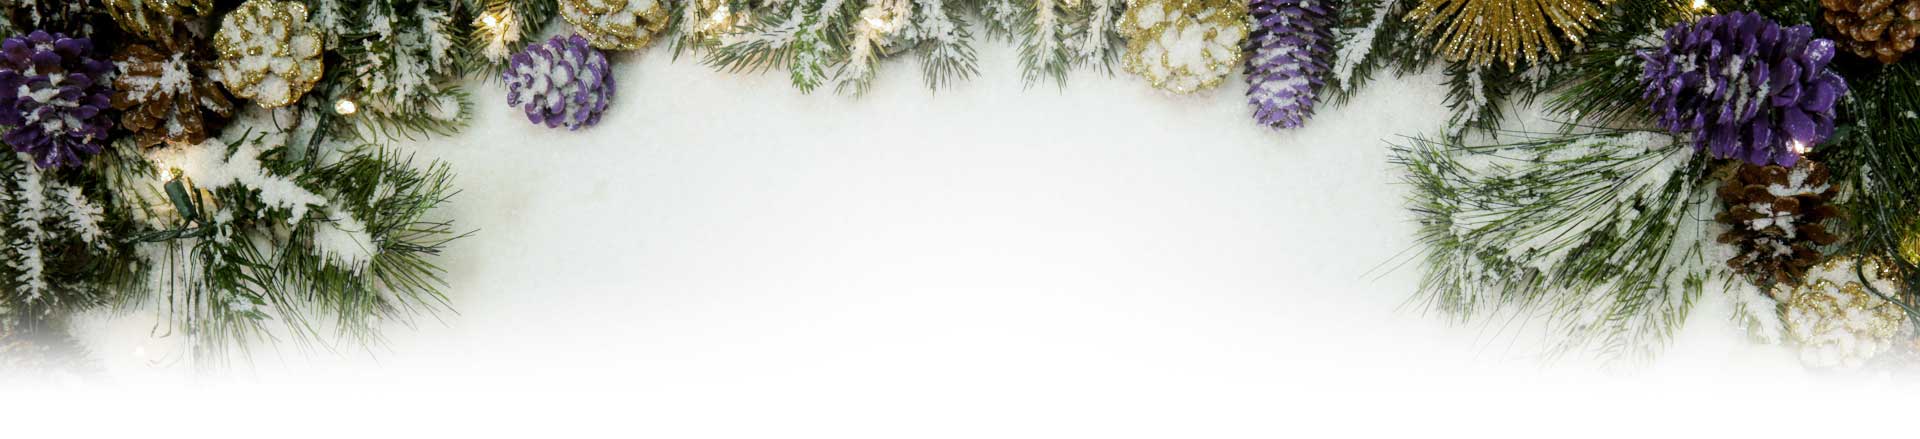 decorative header with christmas decorations